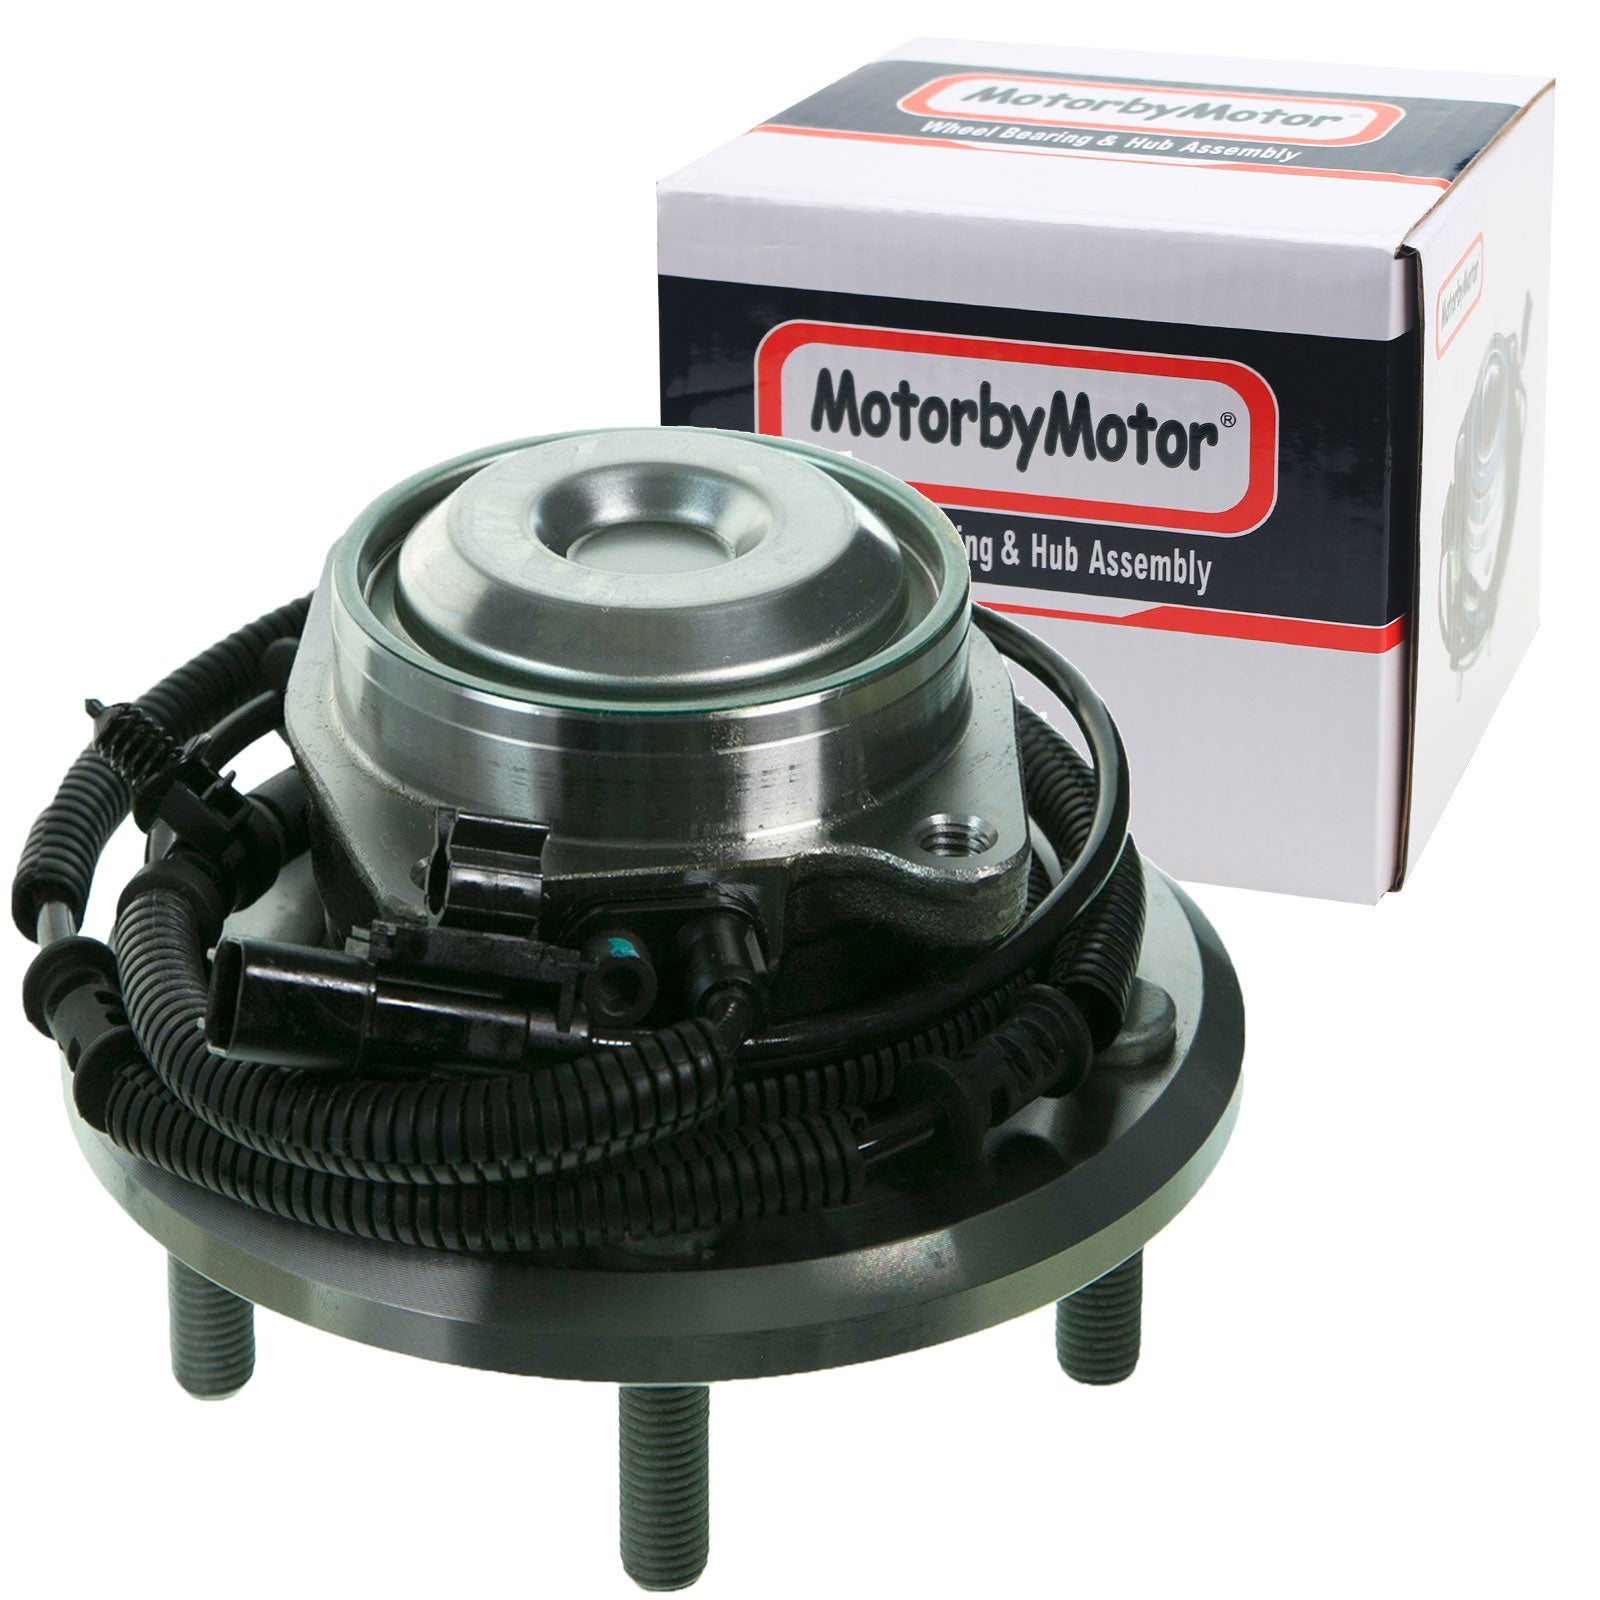 MotorbyMotor 512493 Rear Wheel Bearing Hub Assembly with 5 Lugs Fits for 2012-2016 Chrysler Town & Country, 12-19 Dodge Grand Caravan,Ram C/V, Volkswagen Routan Hub Bearing Assembly MotorbyMotor